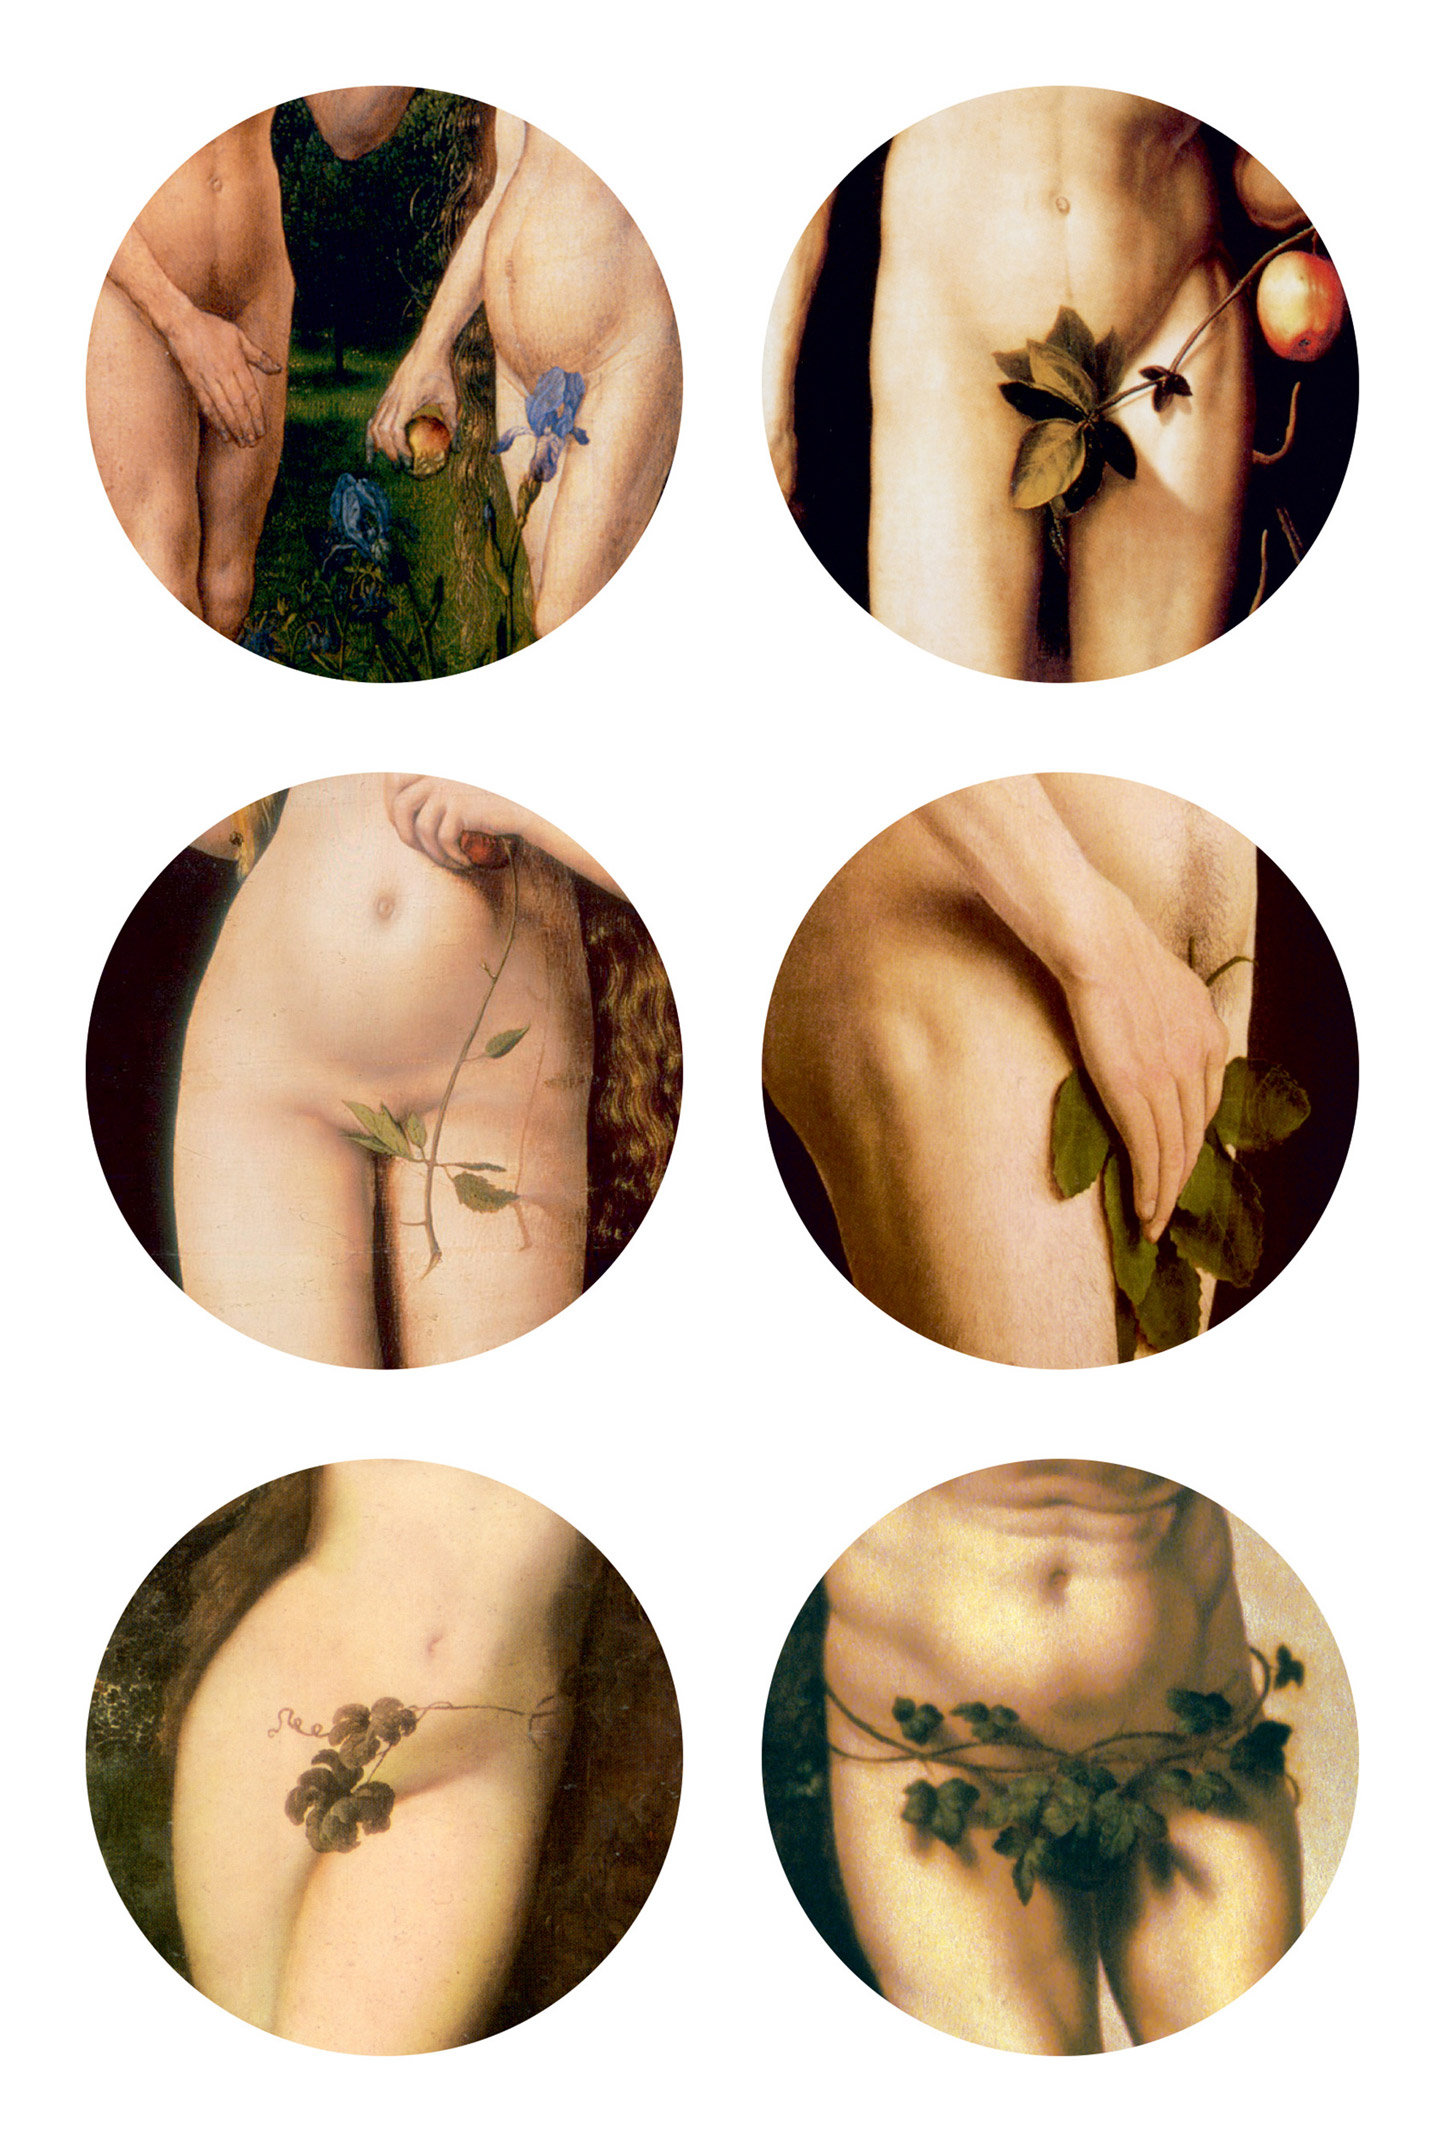 Six close-up paintings of crotches covered by leaves. The paintings include: “The Fall of Man,” circa 1470 by Hugo van der Goes; “Adam and Eve,” circa 1510 by Lucas Cranach the Elder; “Adam and Eve,” circa 1599 by Peter Paul Rubens; “Adam and Eve,” circa 1507 by Hans Baldung Grien; “The Ghent Altarpiece,” circa 1432 by Hubert and Jan van Eyck; and finally, “Adam and Eve,” circa 1520, by Jan Gossaert. 